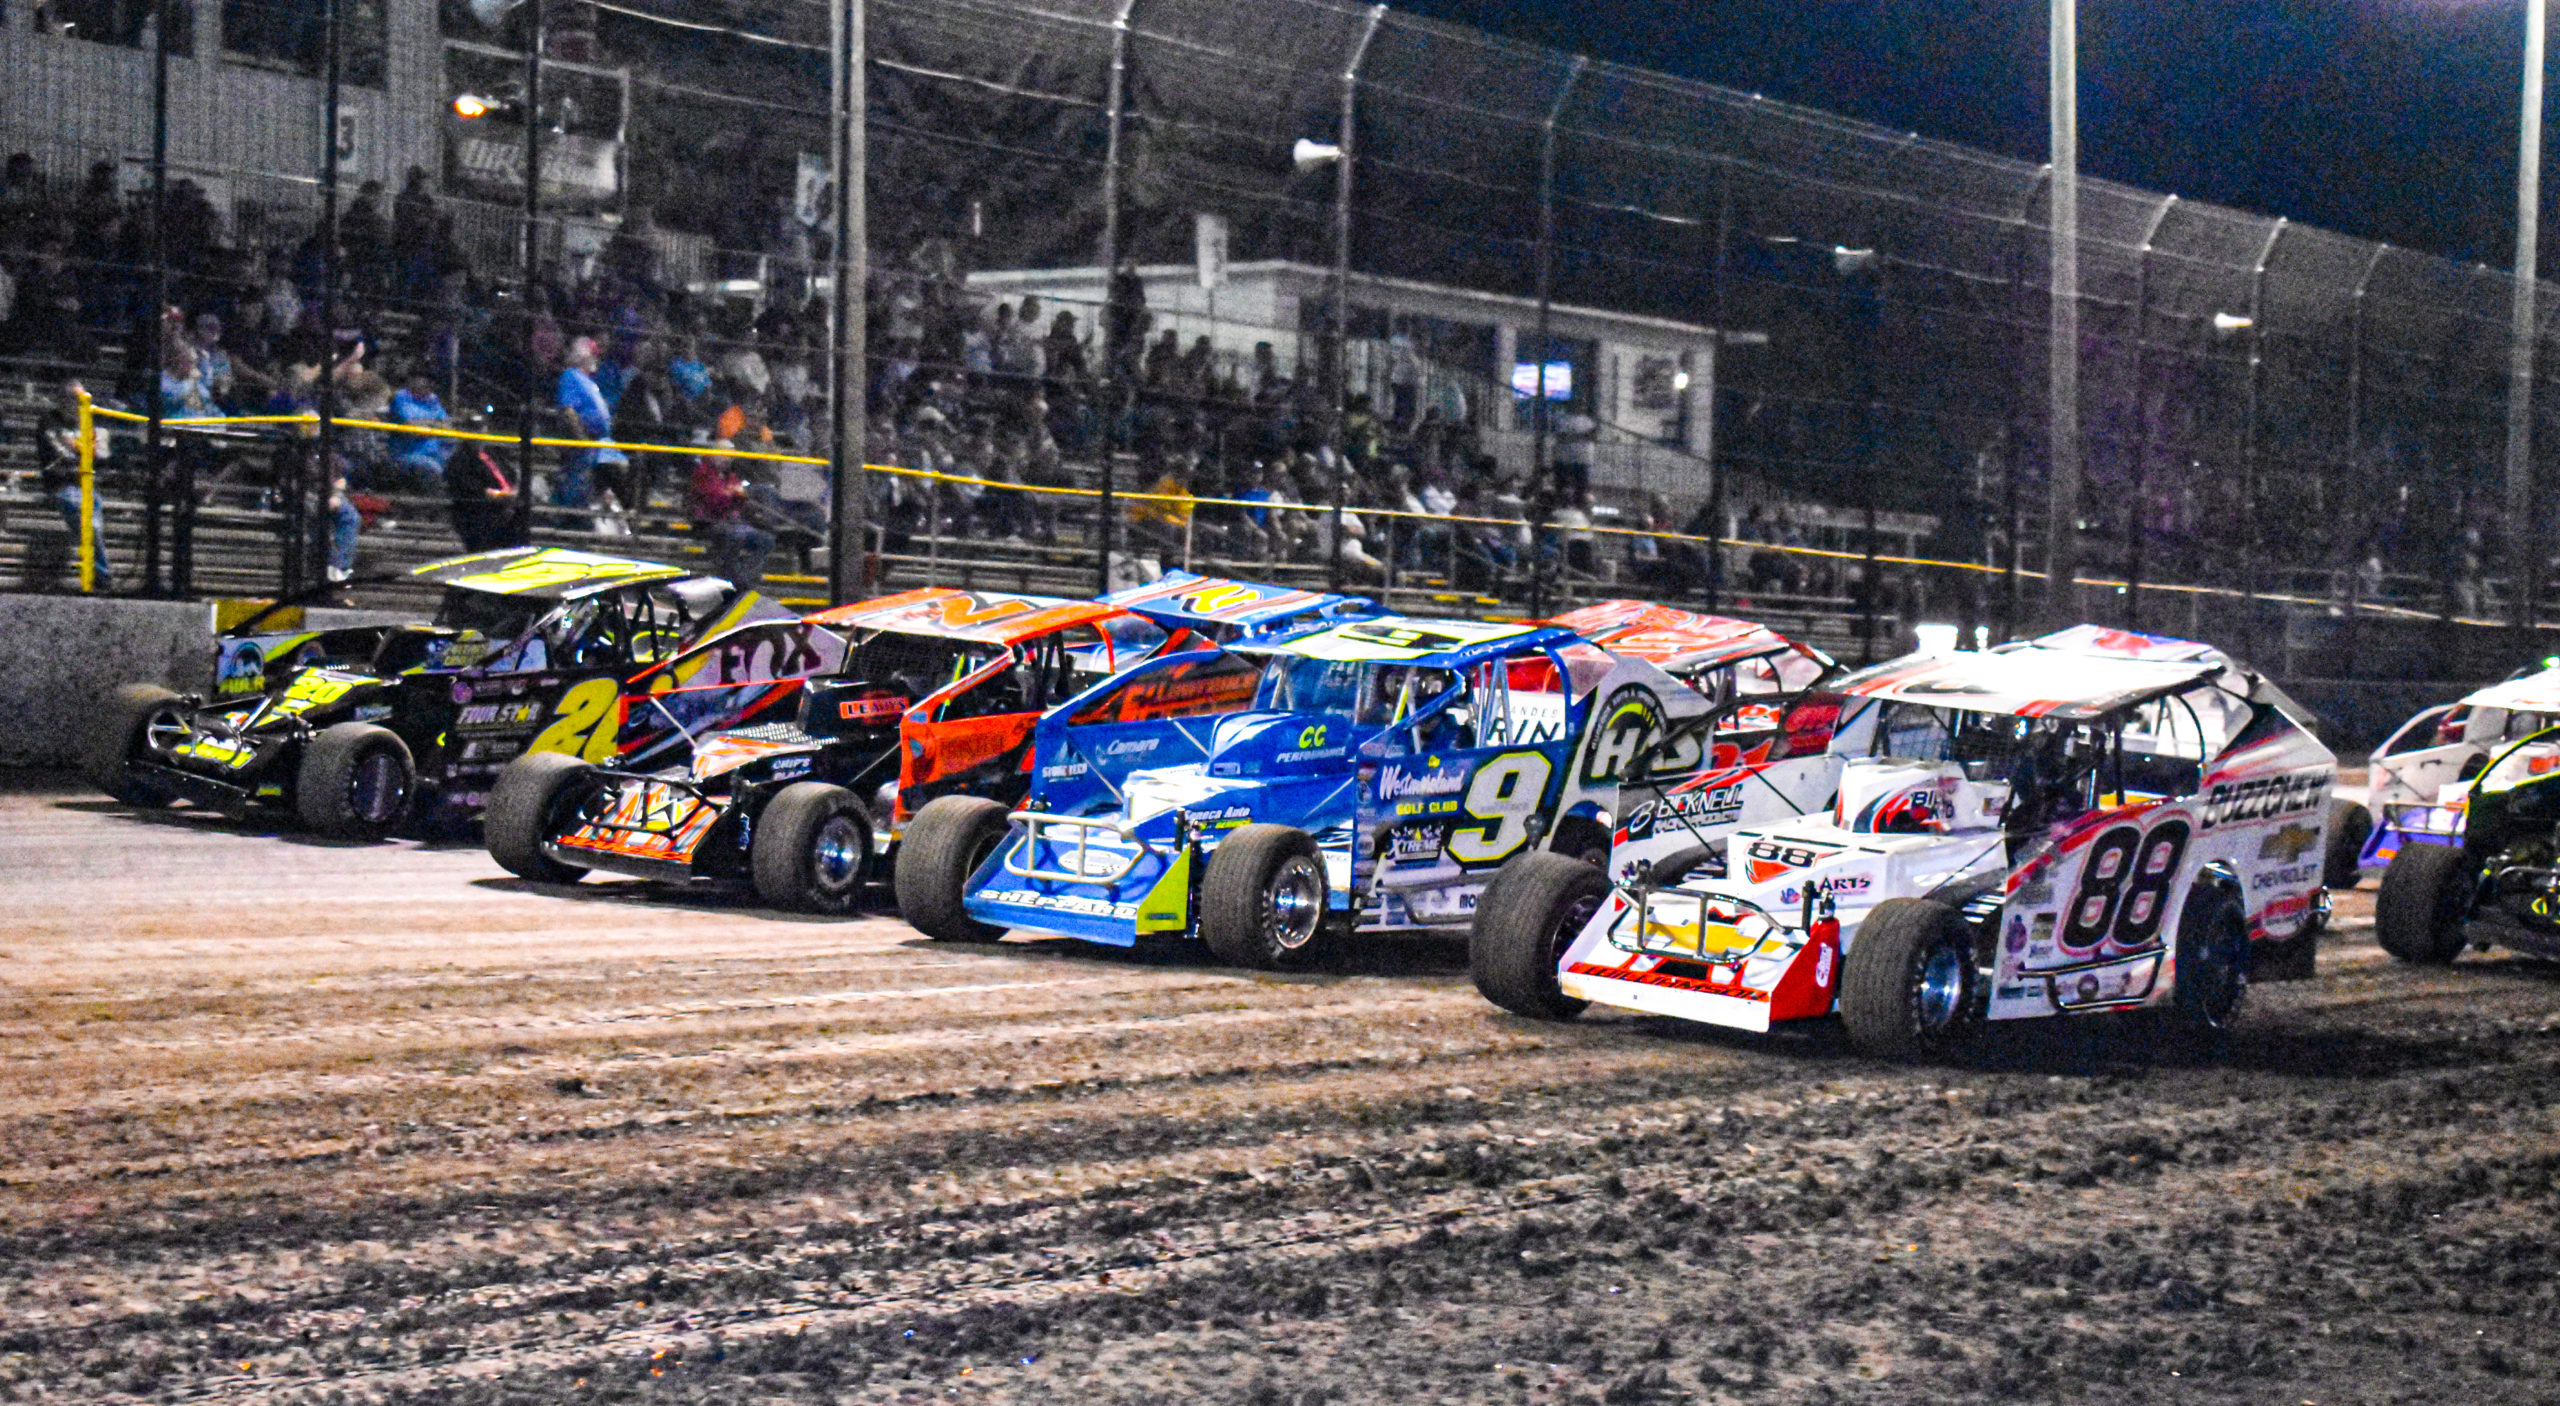 ANOTHER ANIMAL Higher Purses, New Track Surface Await Super DIRTcar